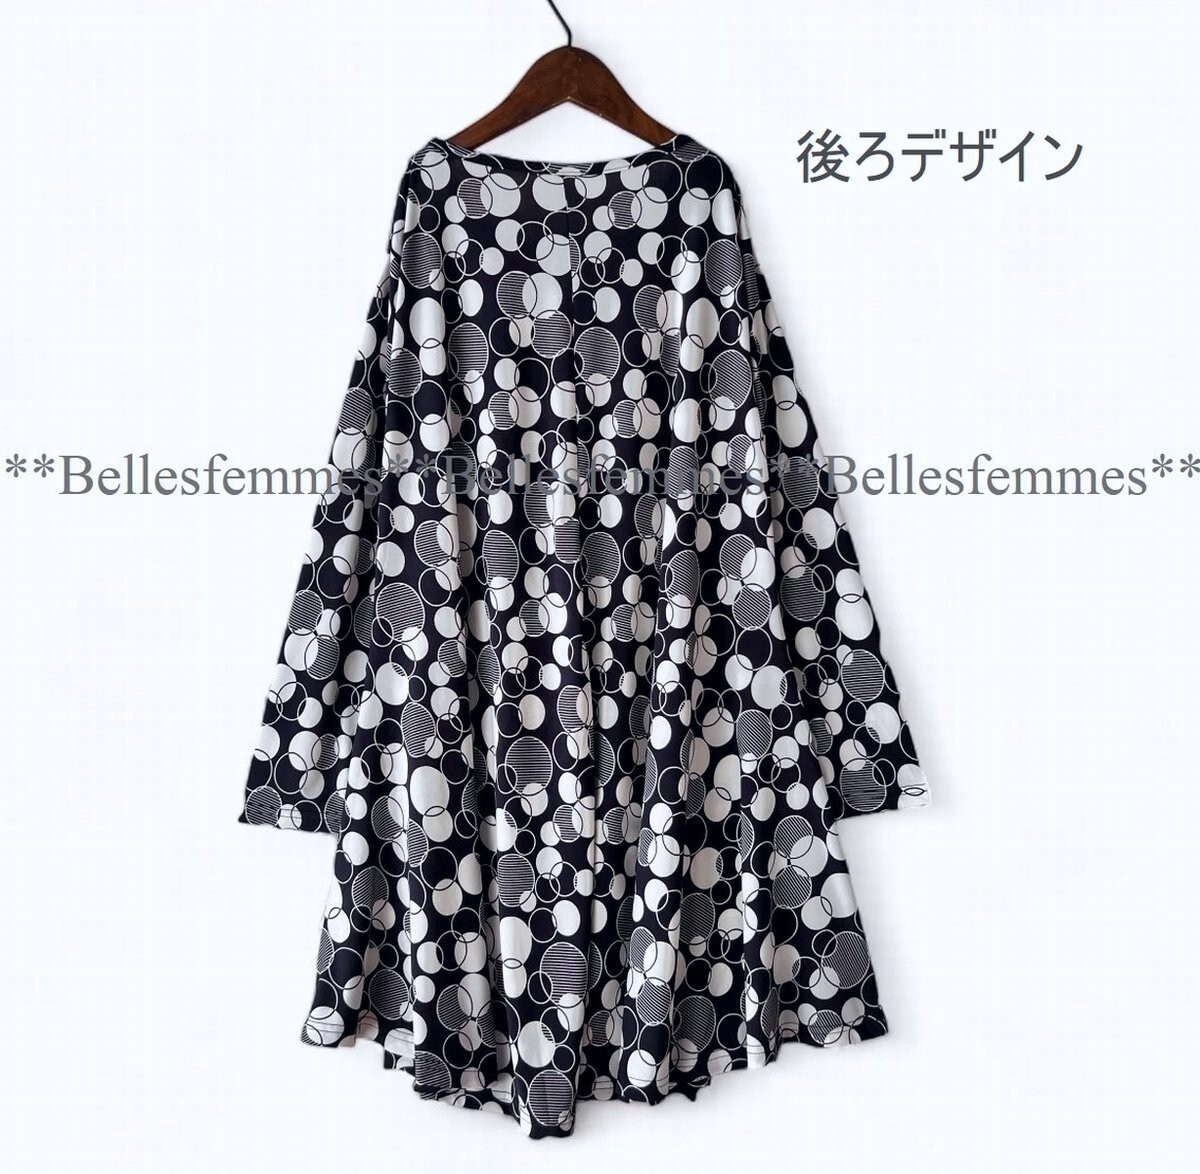 *Belles** postage 185 jpy * new goods M~L correspondence ** spring tunic *... feeling. A line Silhouette * enough length . height flair tunic 2423272 navy * Mrs. 